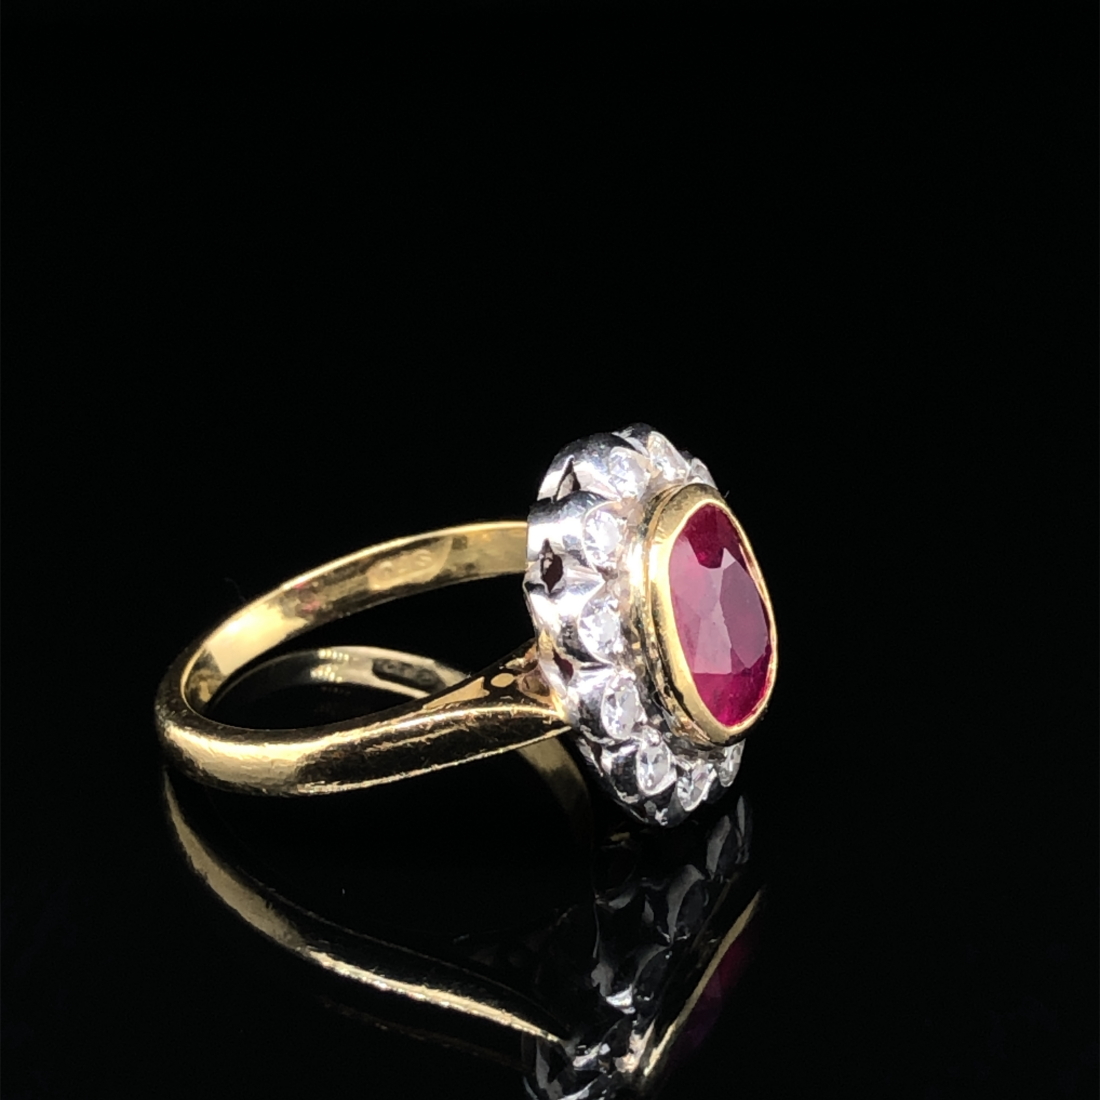 AN 18ct HALLMARKED GOLD RUBY AND DIAMOND OVAL SHAPED CLUSTER RING. THE SINGLE MEDIUM TO DARK - Image 2 of 20